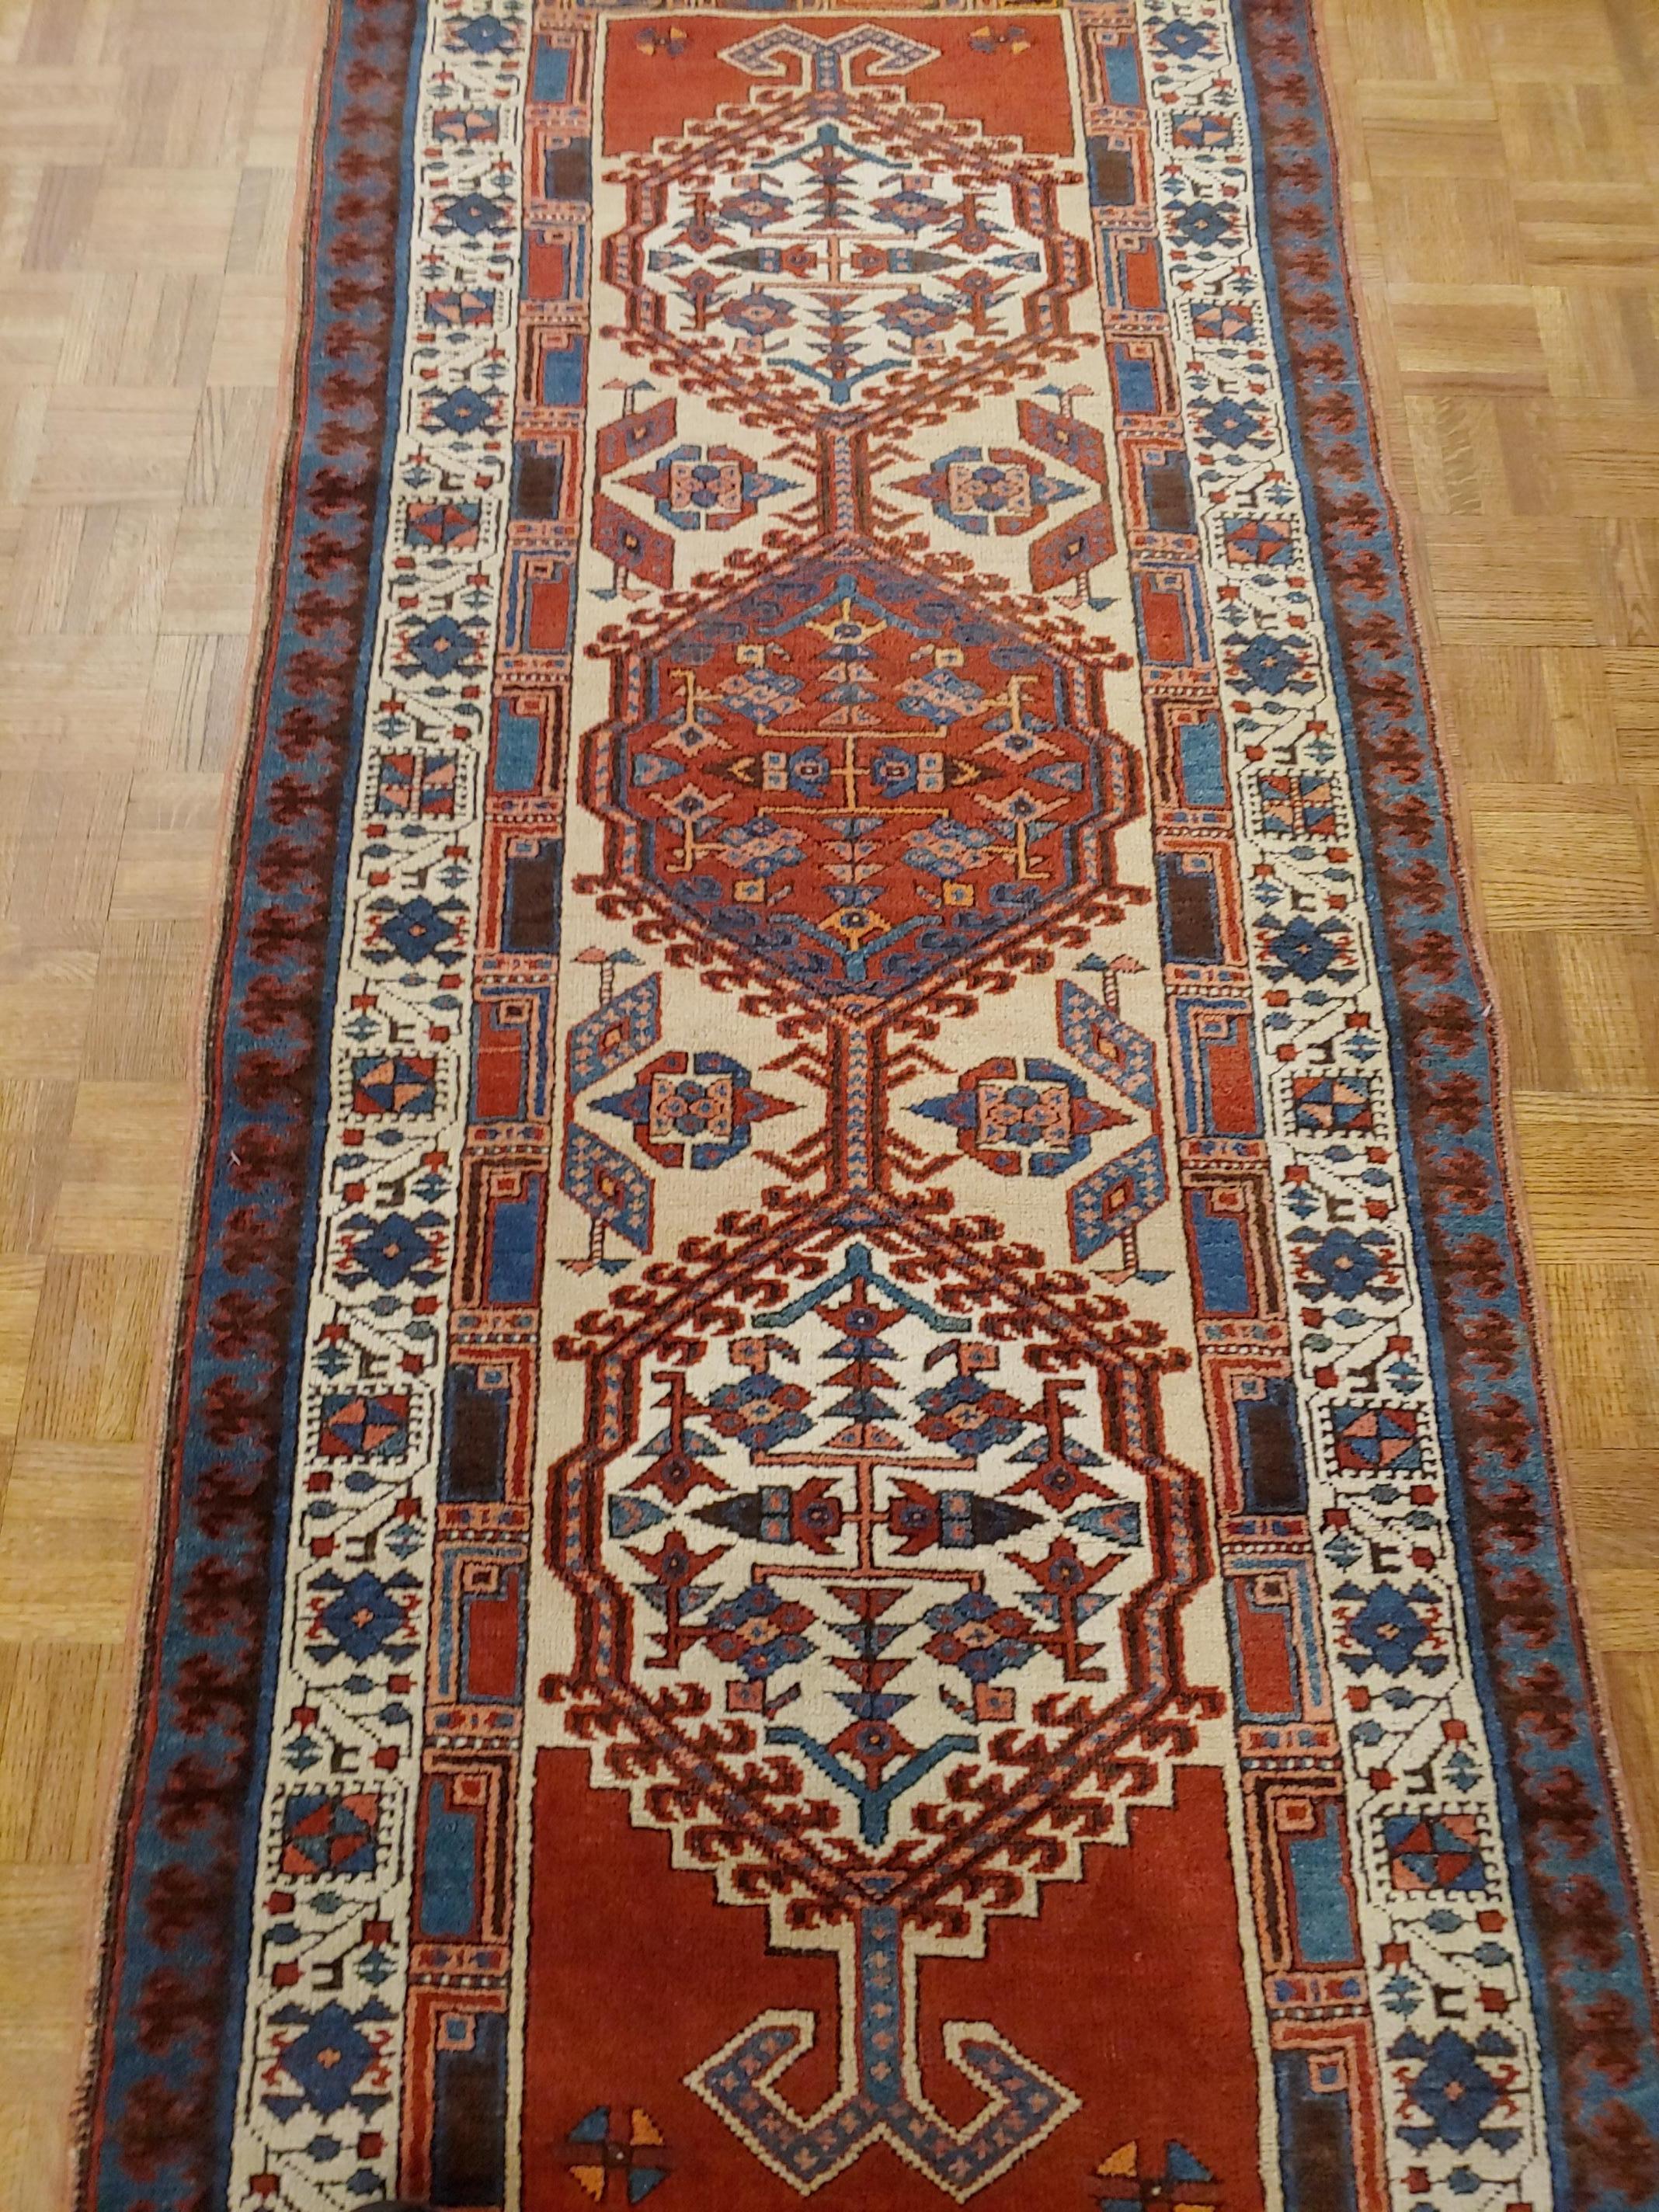 This is a striking antique Persian Serab. Serab rugs are known for their geometric design as well as the use of camel color. The typical Serab motif with the use of a cinnamon rust color is accented on the camel field. This rug is 2-10 x 7 and is